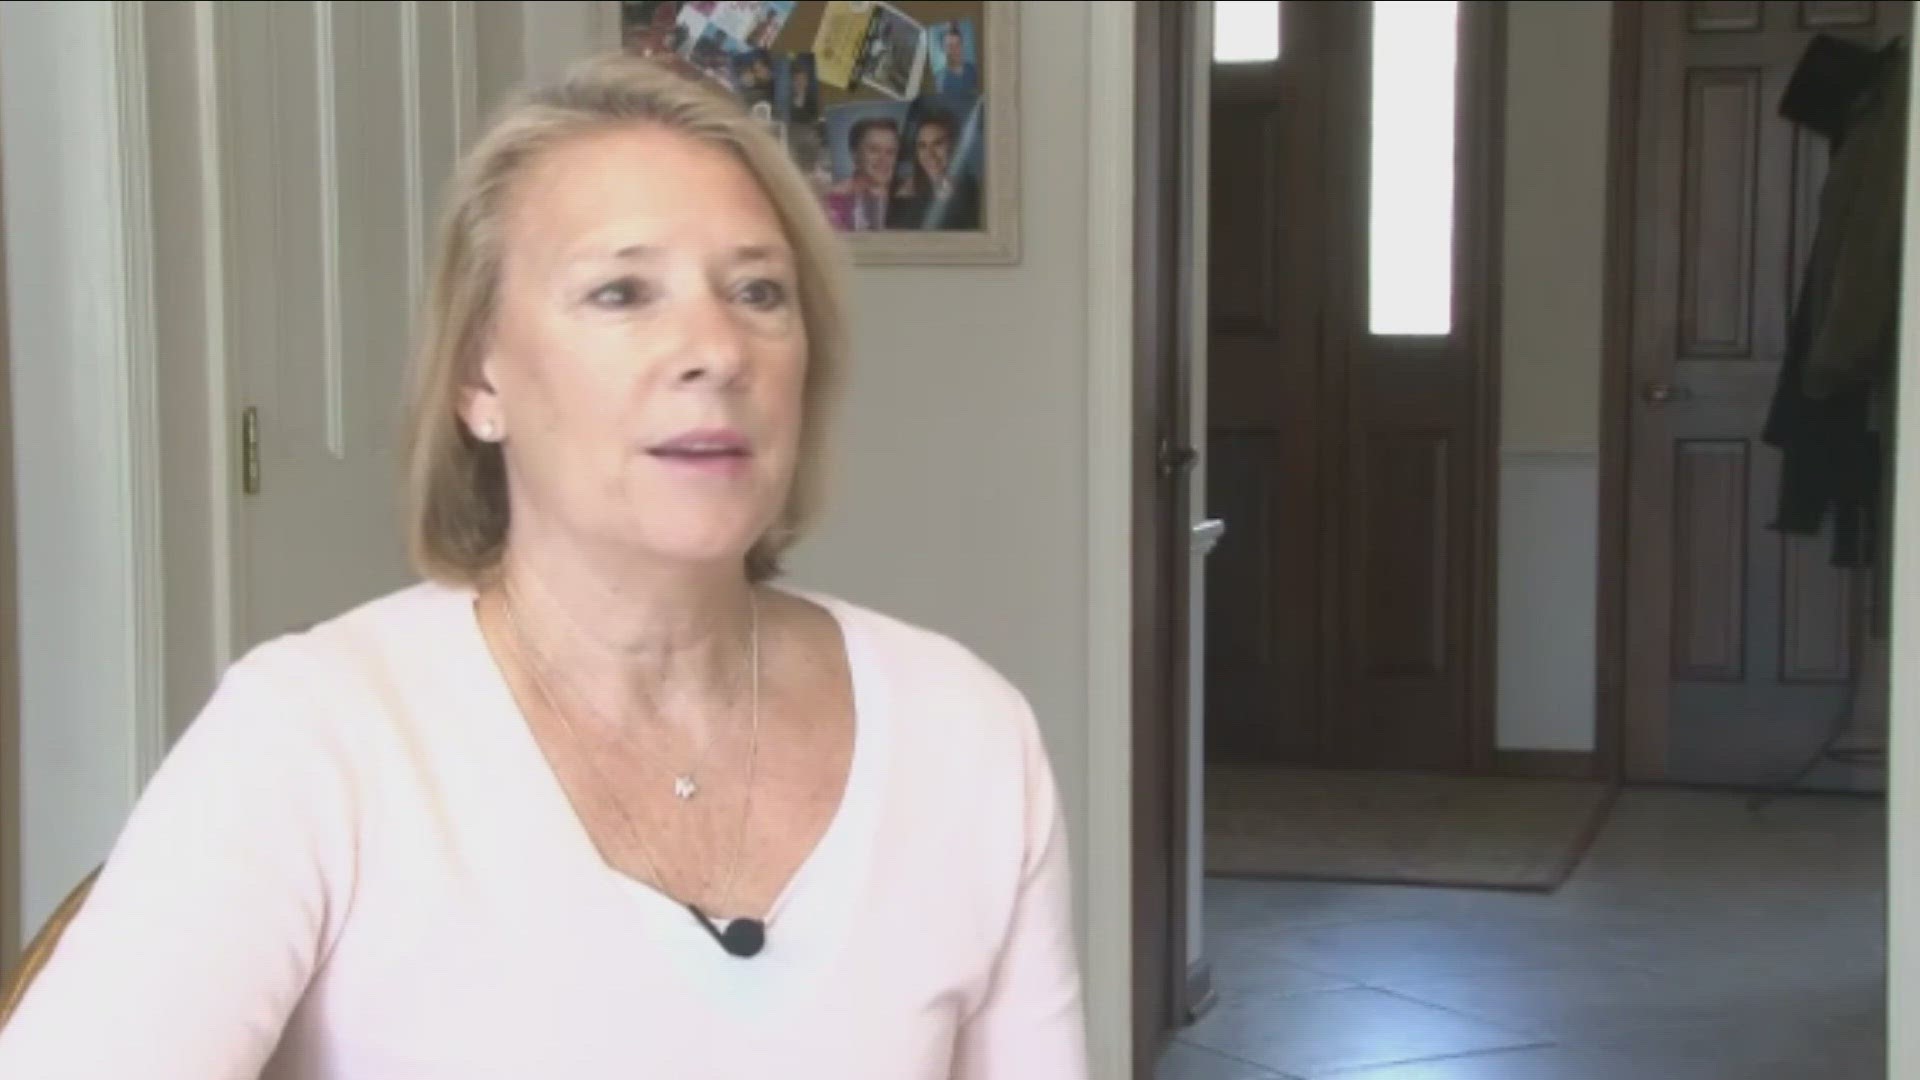 woman turned out to be 62-year-old Joan Wozer who Channel 2 actually interviewd back in 2017